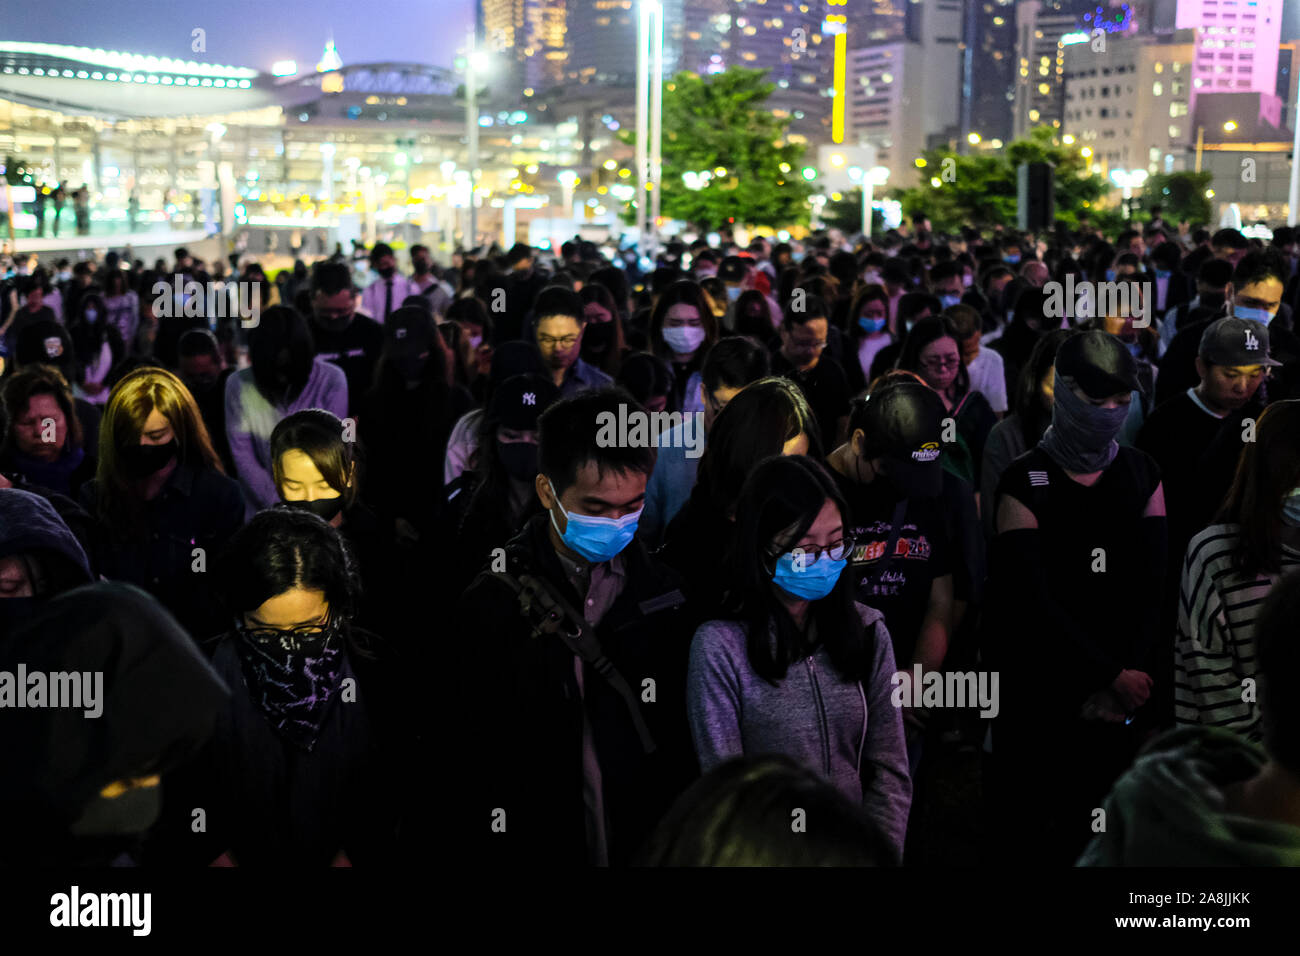 Masked demonstrators praying during the rally.Memorial rally at Tamar Park in Hong Kong to mourn the death of a 22 years old university student, Alex Chow Tsz Lok who died from a serious brain injury during a fall on November 4th as police skirmished with demonstrators last weekend. He was left in critical condition and died after suffering a cardiac arrest. Stock Photo